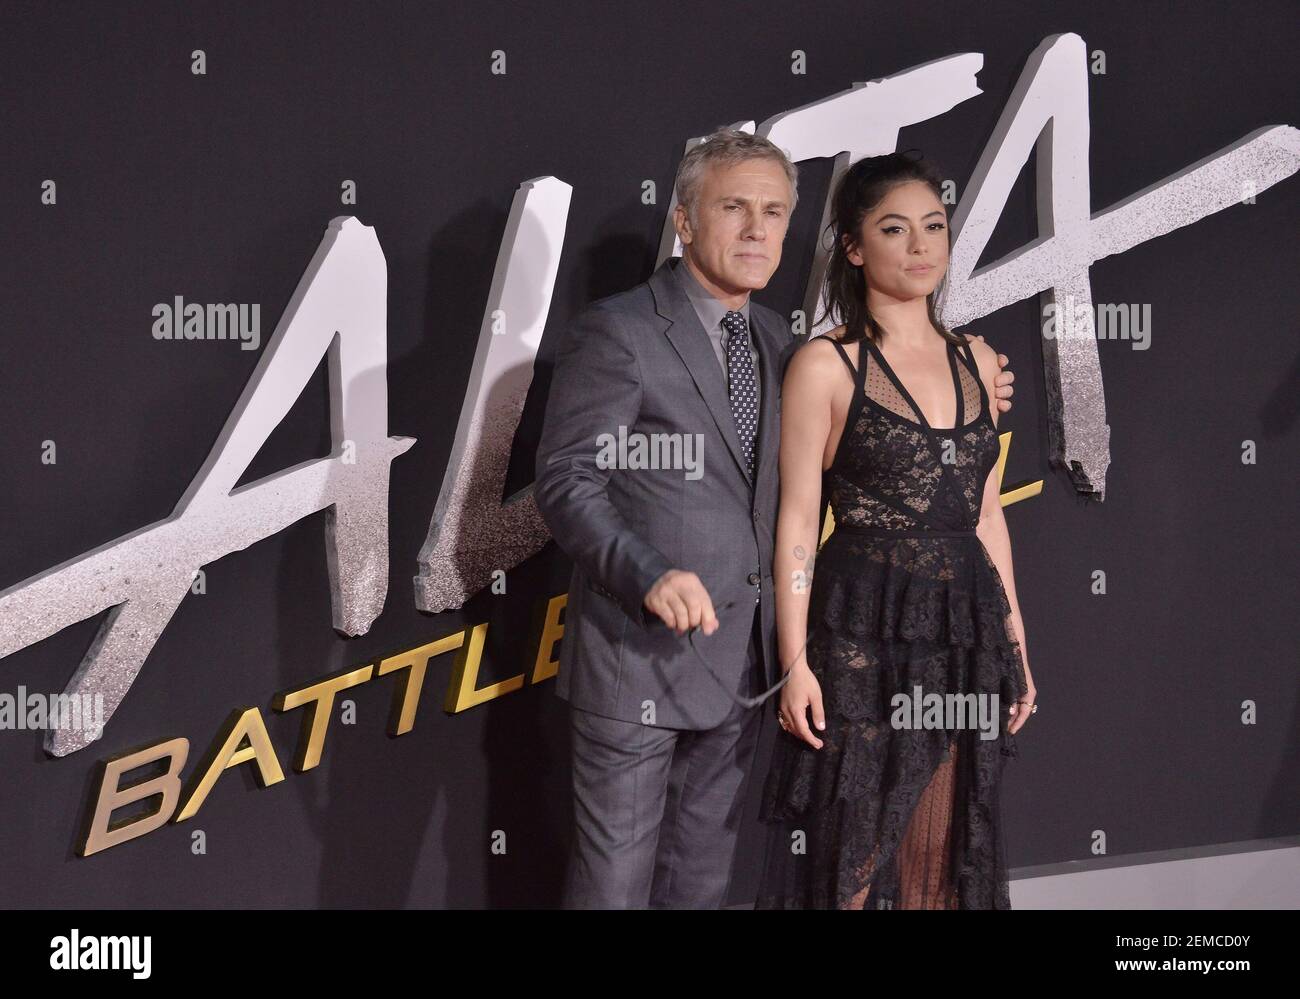 LOS ANGELES - DECEMBER 6: Presenters Christoph Waltz and Rosa Salazar  appear onstage at the 2018 Game Awards at the Microsoft Theater on December  6, 2018 in Los Angeles, California. (Photo by